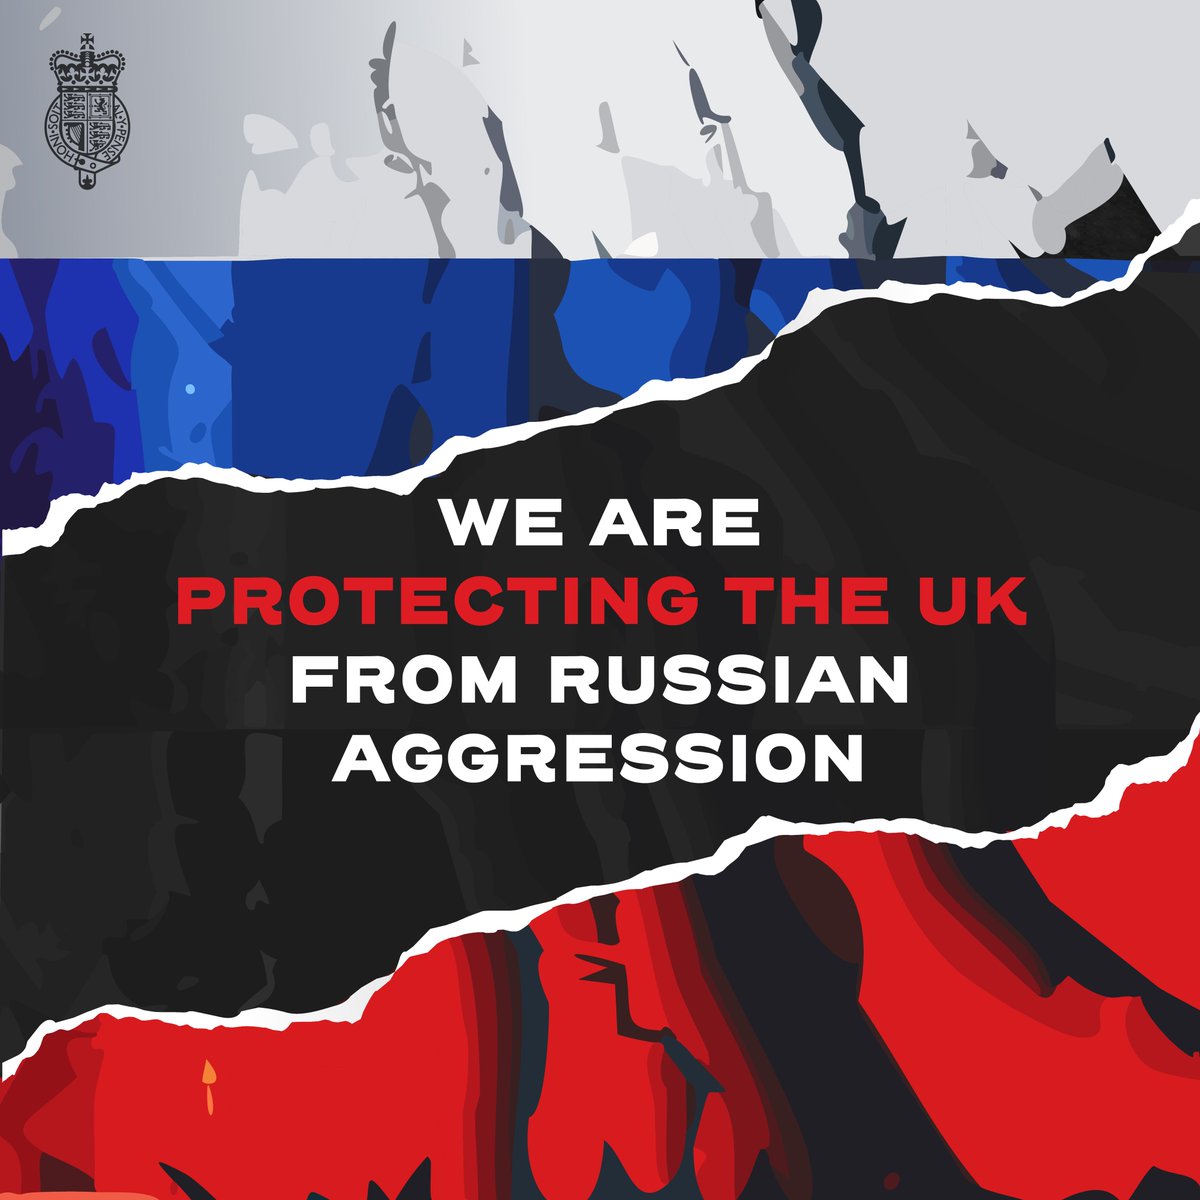 The UK stands with our allies, now and always. In the face of continued hostility we’re expelling an undeclared Russian military intelligence officer, and further dismantling Russian intelligence gathering operations in the UK. Russia’s aggression will never be tolerated.